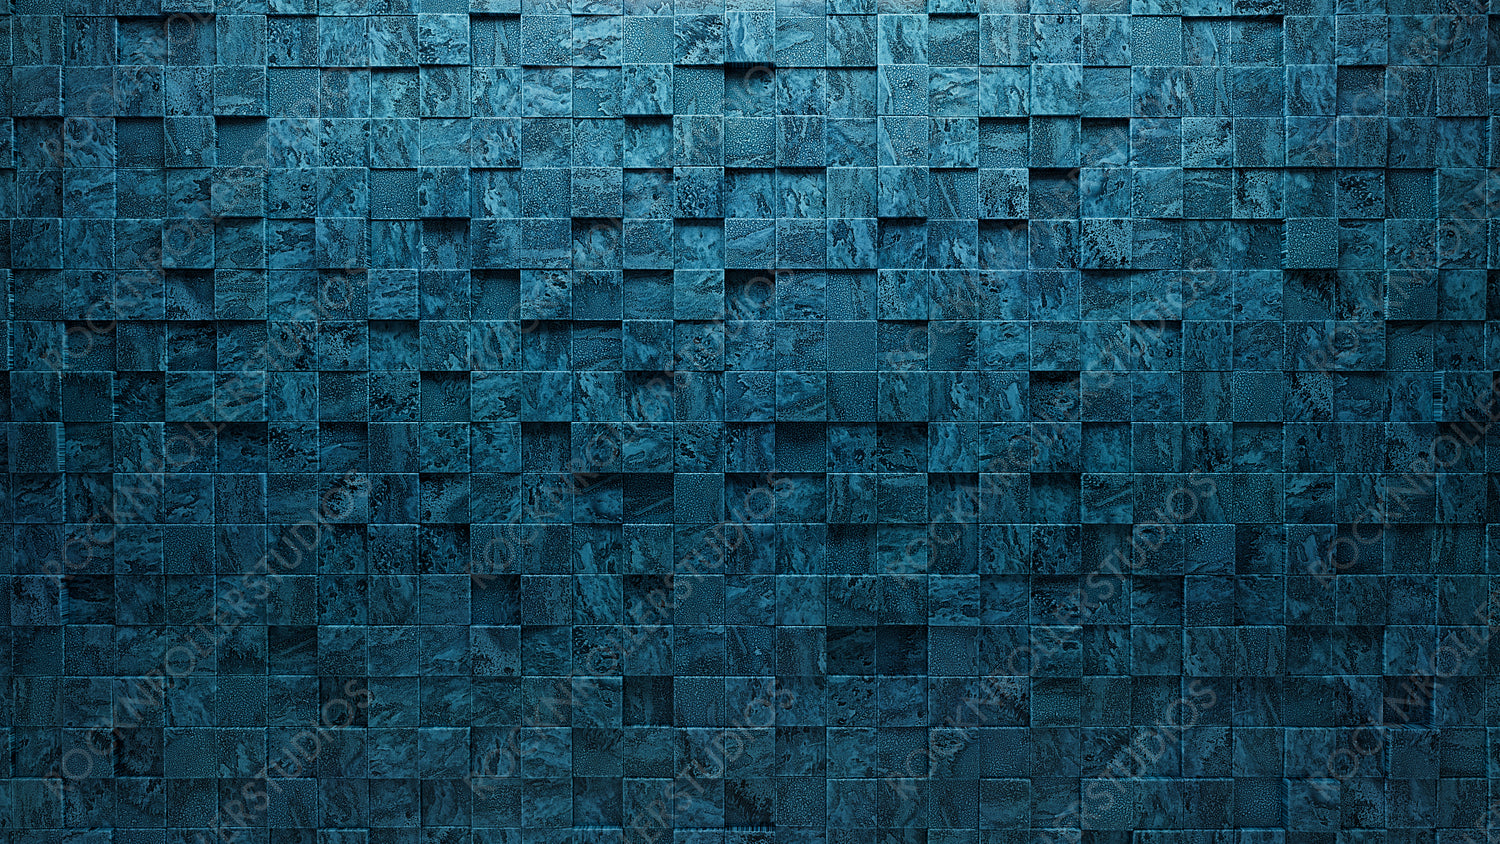 Square Tiles arranged to create a Textured wall. Blue Patina, Glazed Background formed from 3D blocks. 3D Render